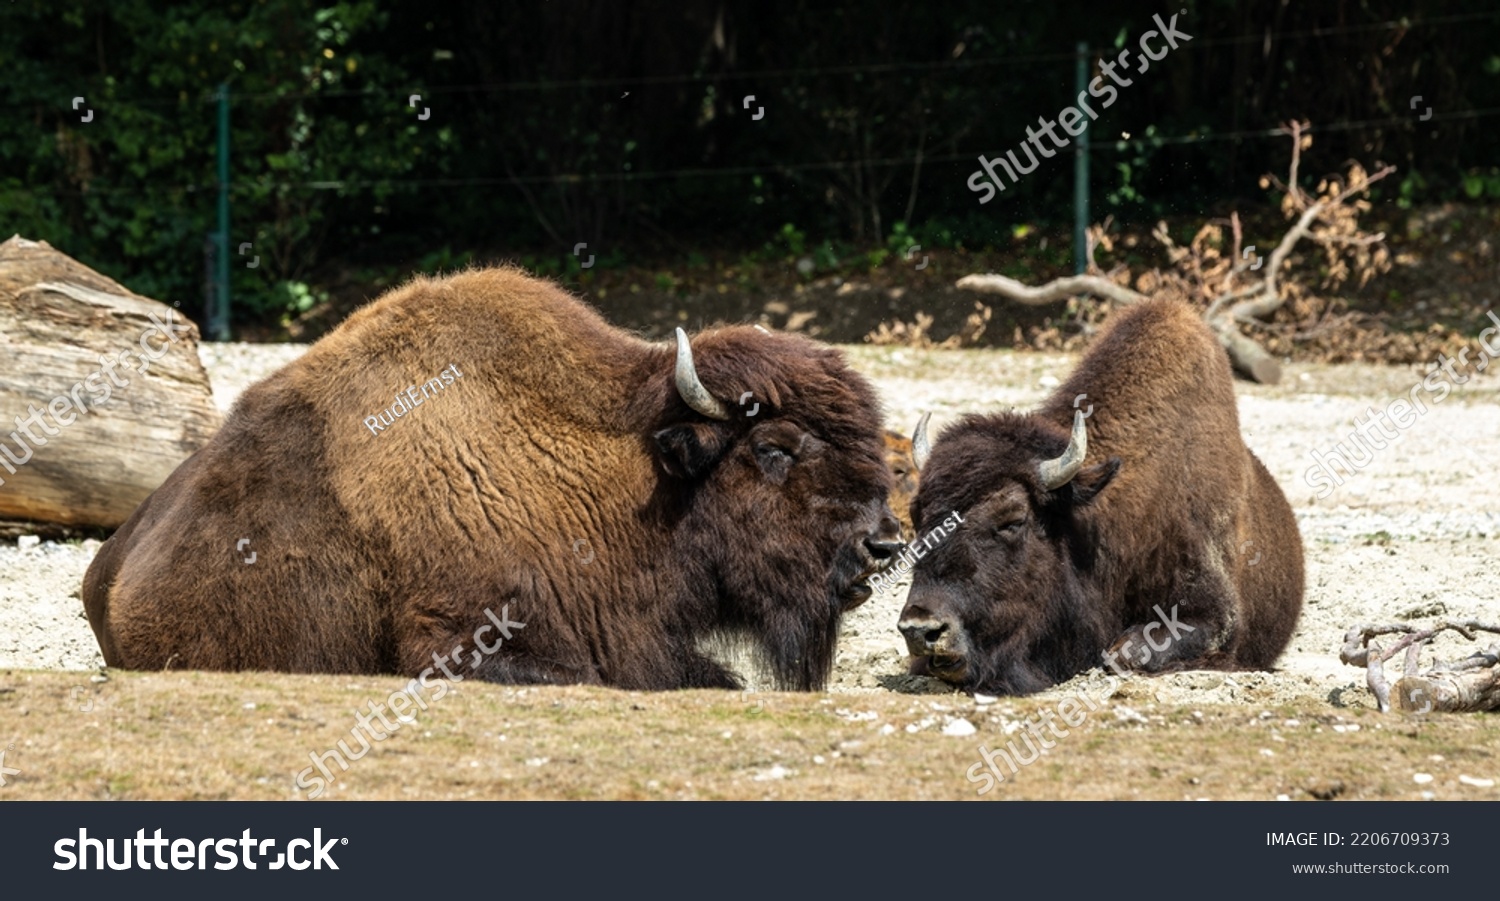 The American bison or simply bison, also commonly known as the American buffalo or simply buffalo, is a North American species of bison that once roamed North America in vast herds. #2206709373